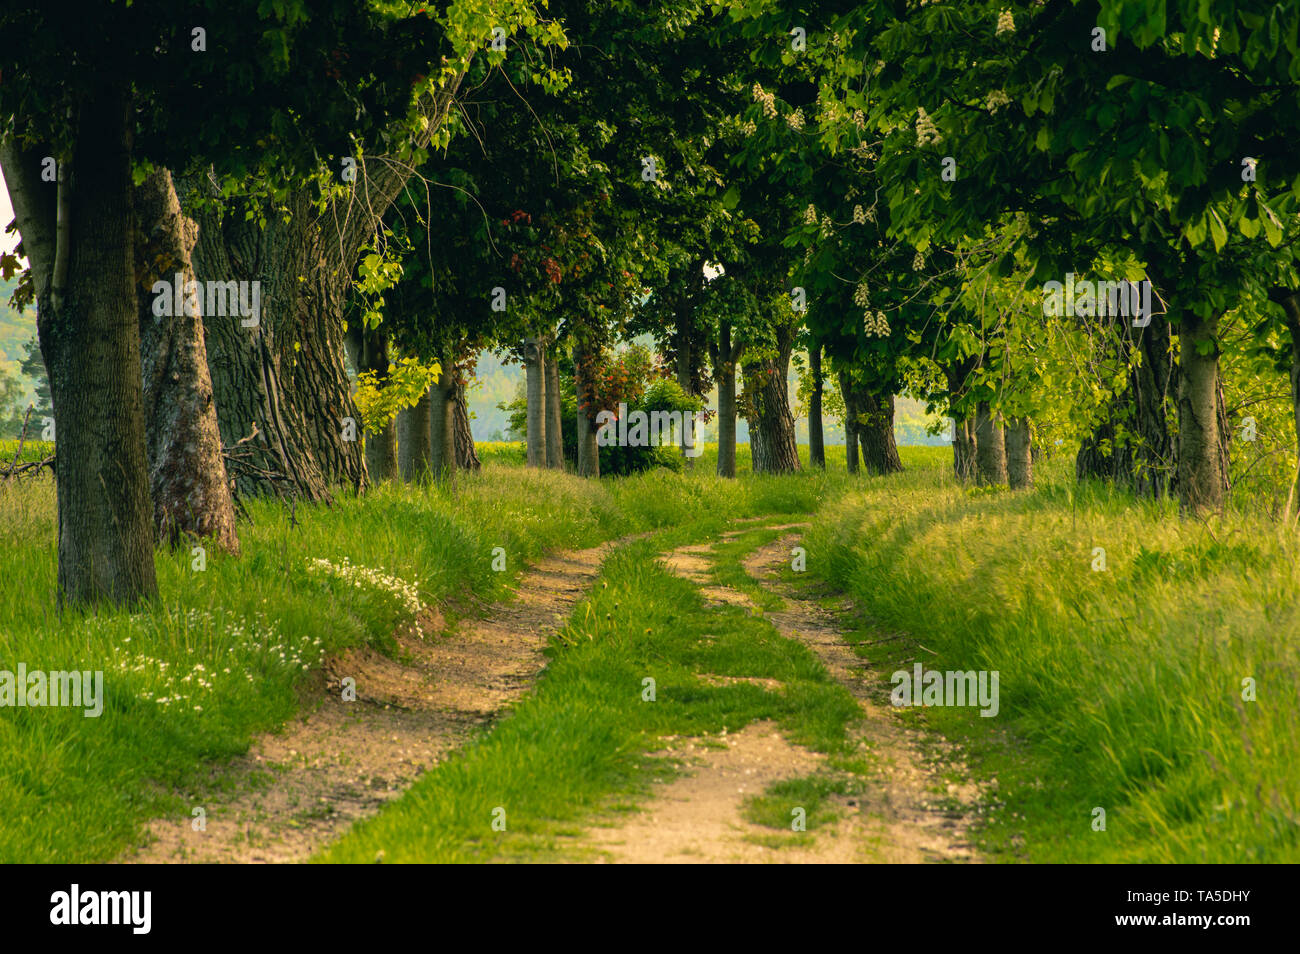 farm road lined by maple and chestnut trees Stock Photo